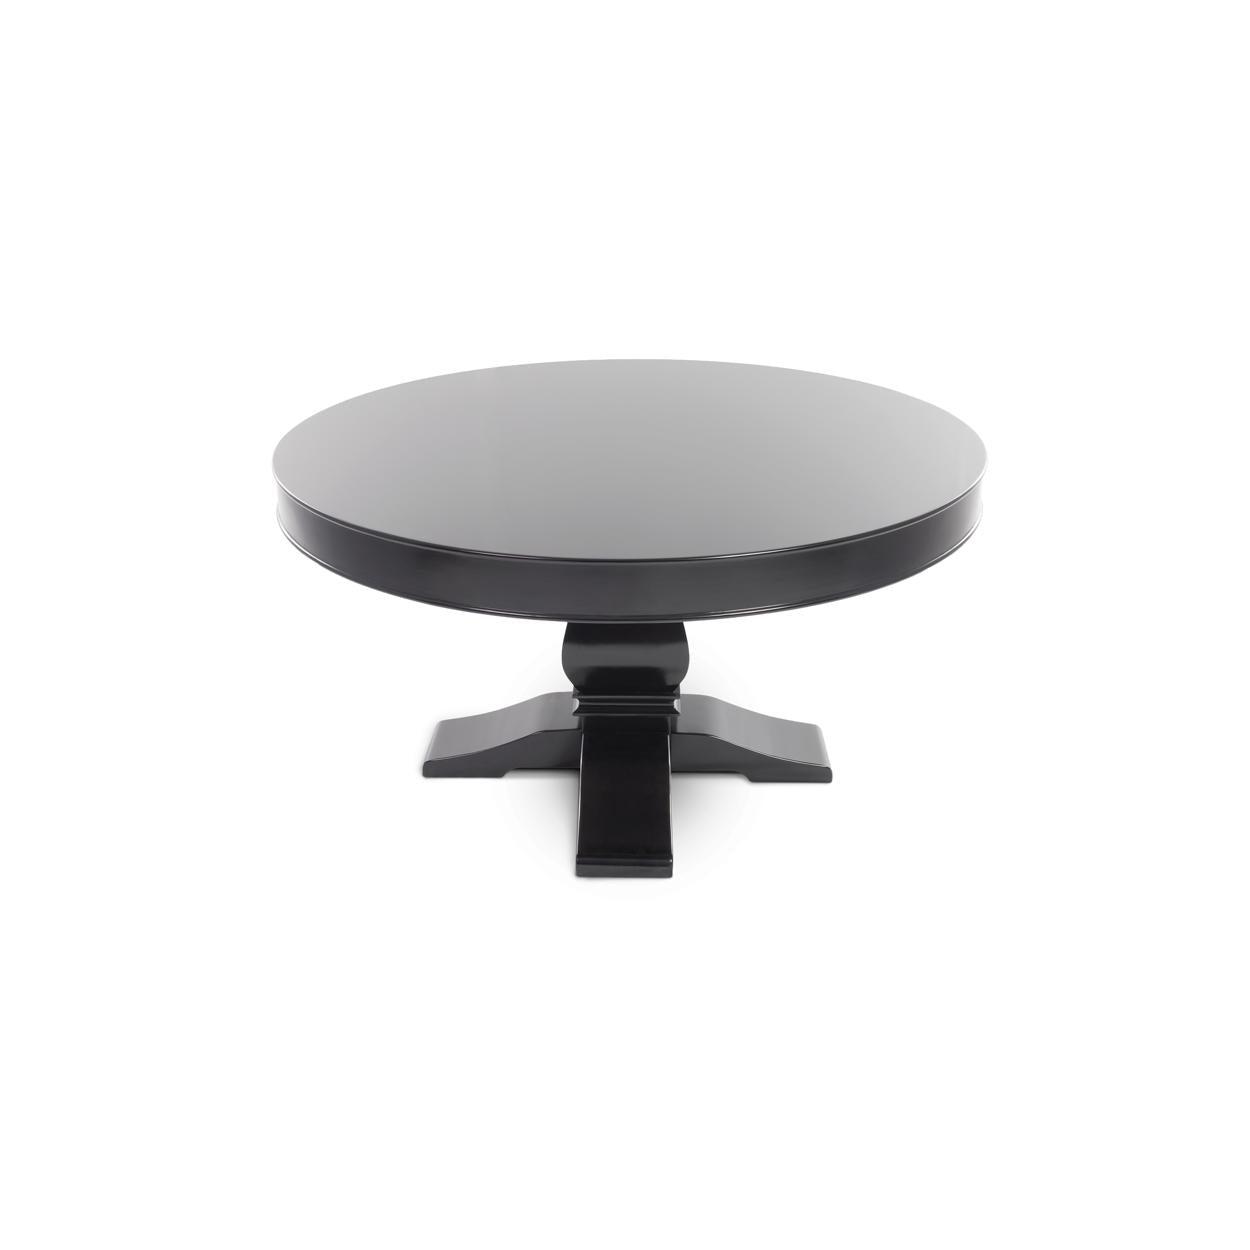 Round Poker Table With LED Lights – The Ginza LED by BBO-AMERICANA-POKER-TABLES